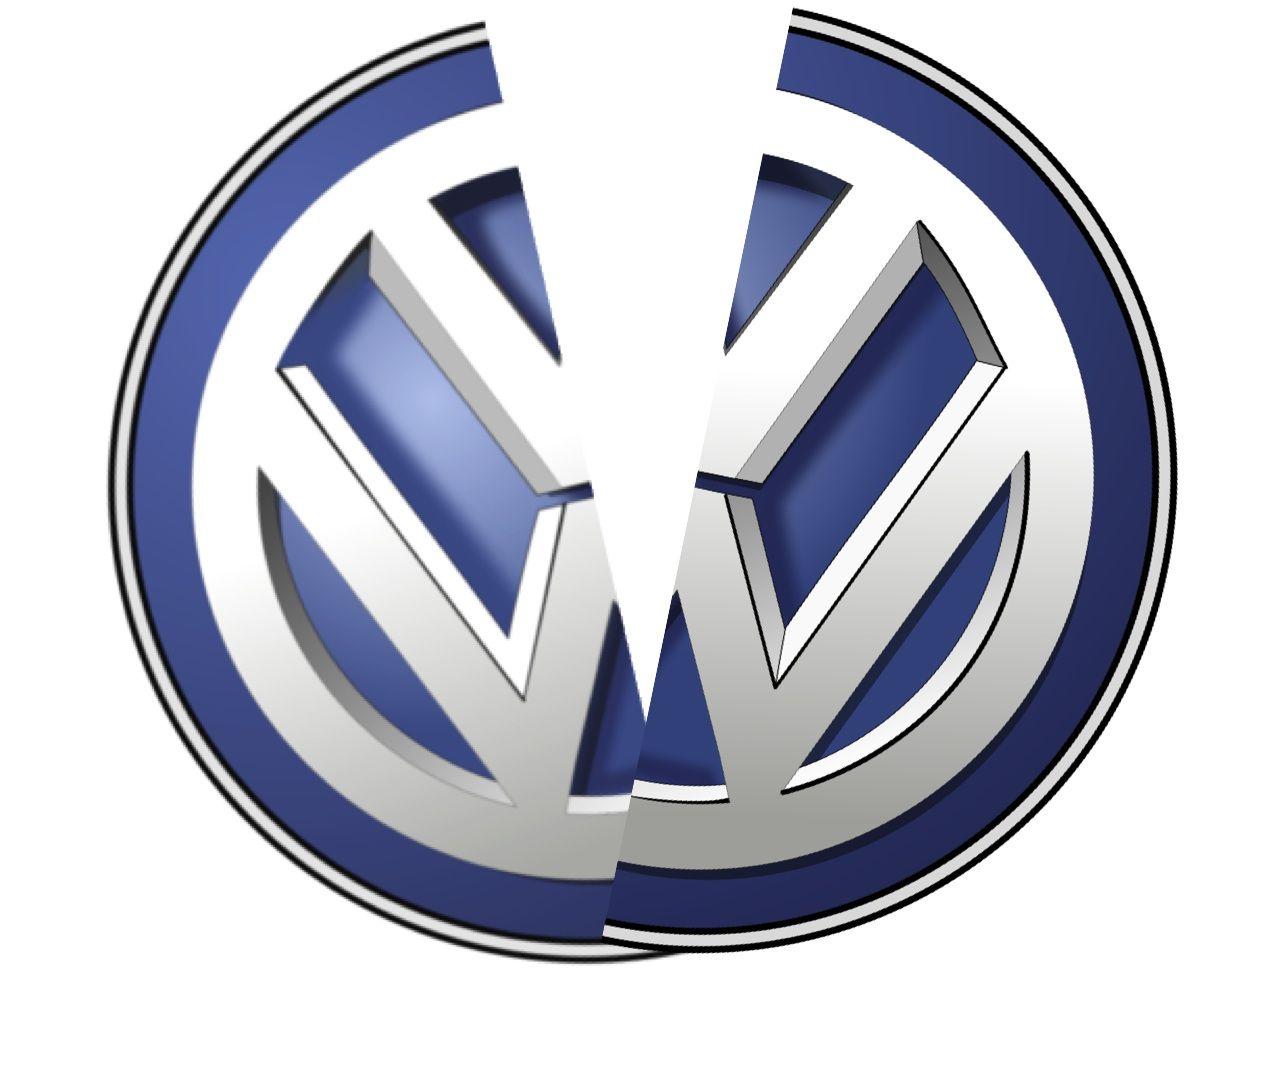 Broken VW Logo - Honesty and the Tale of Two Organizations